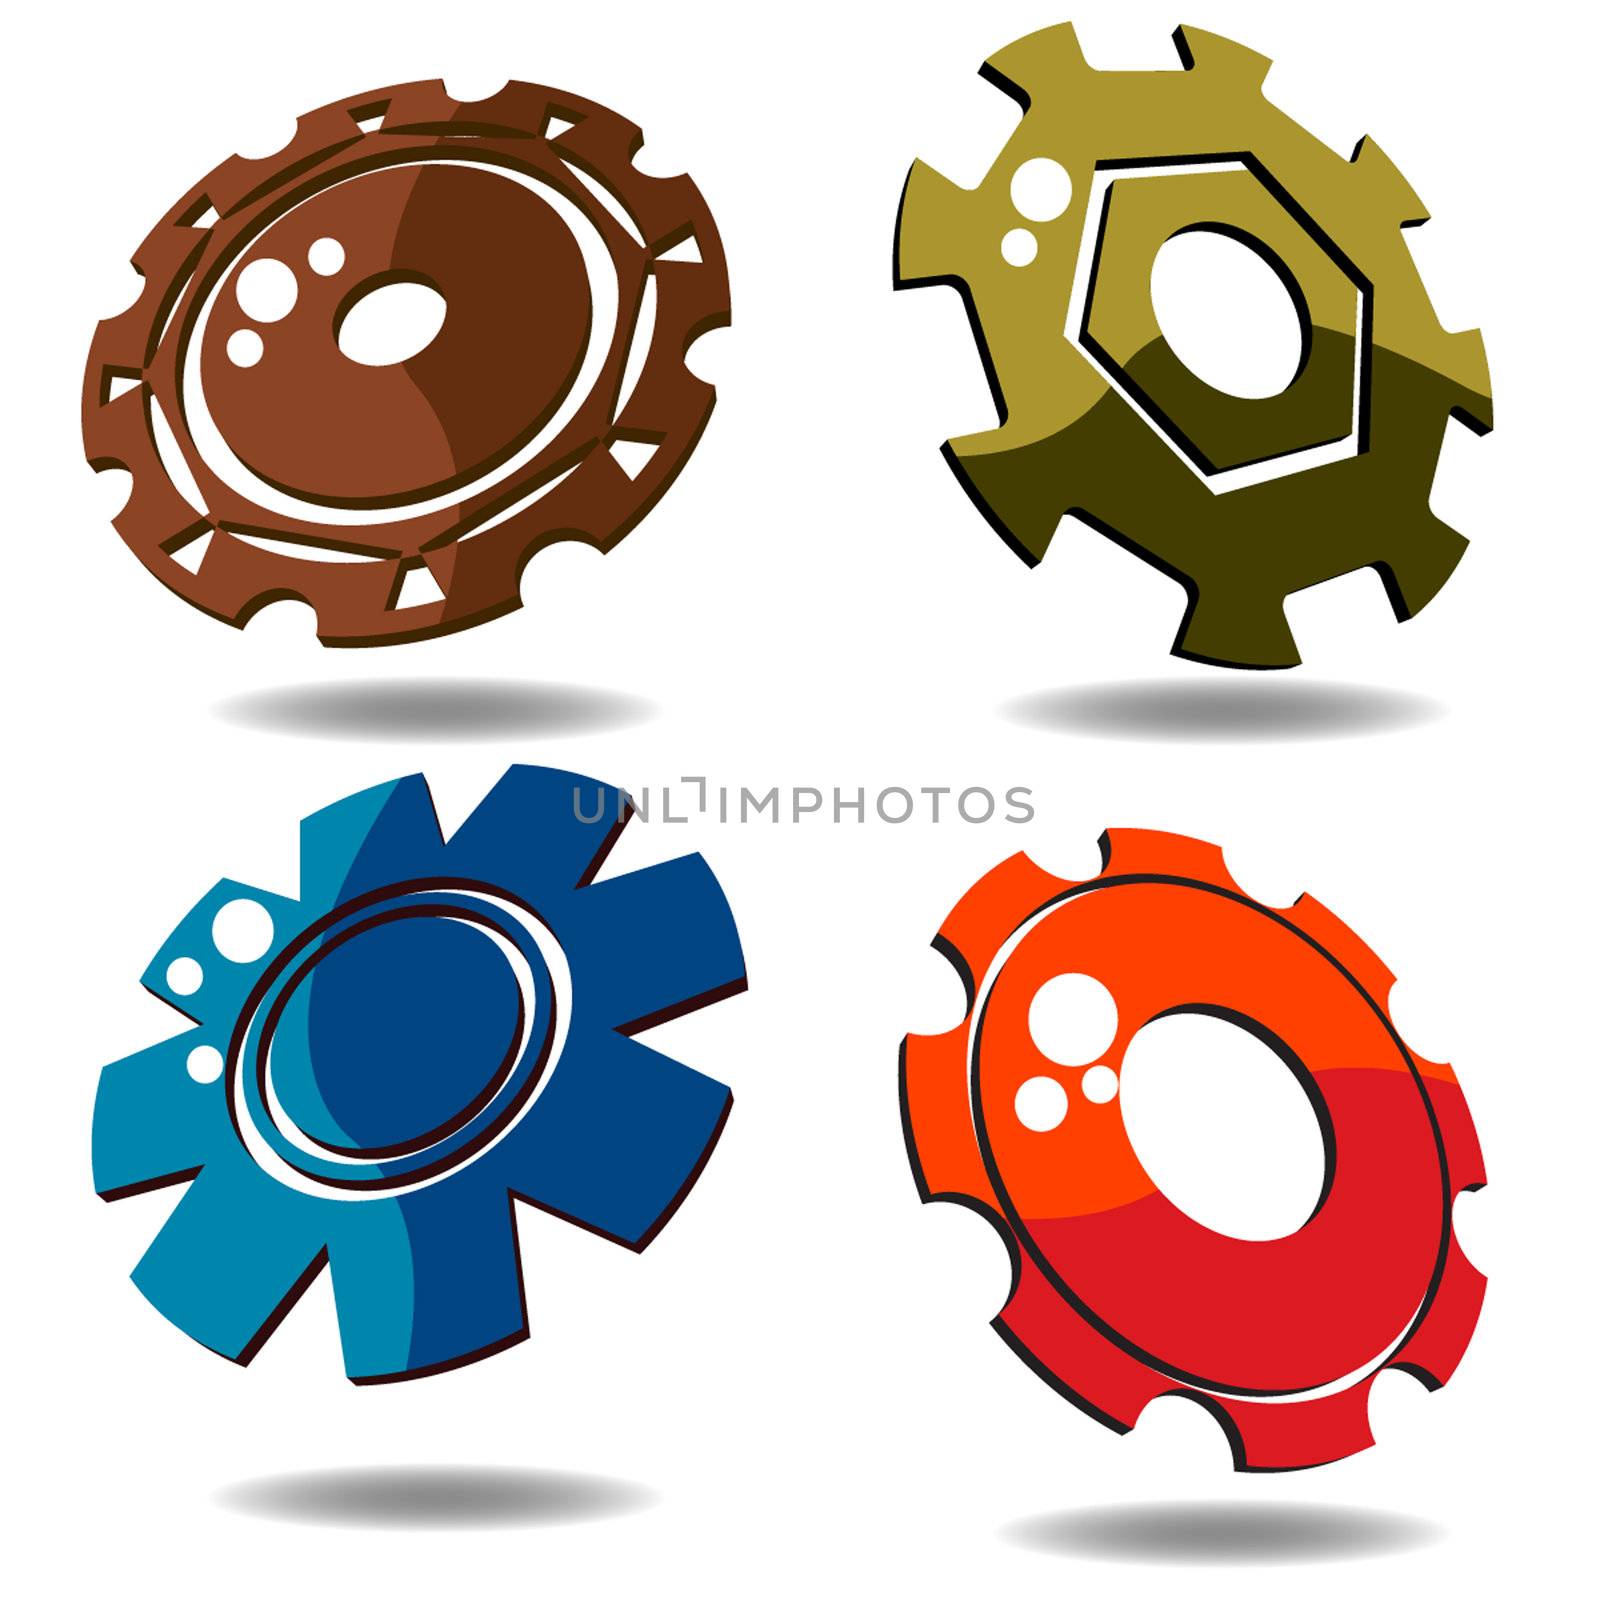 Gear icons over white background in various colors